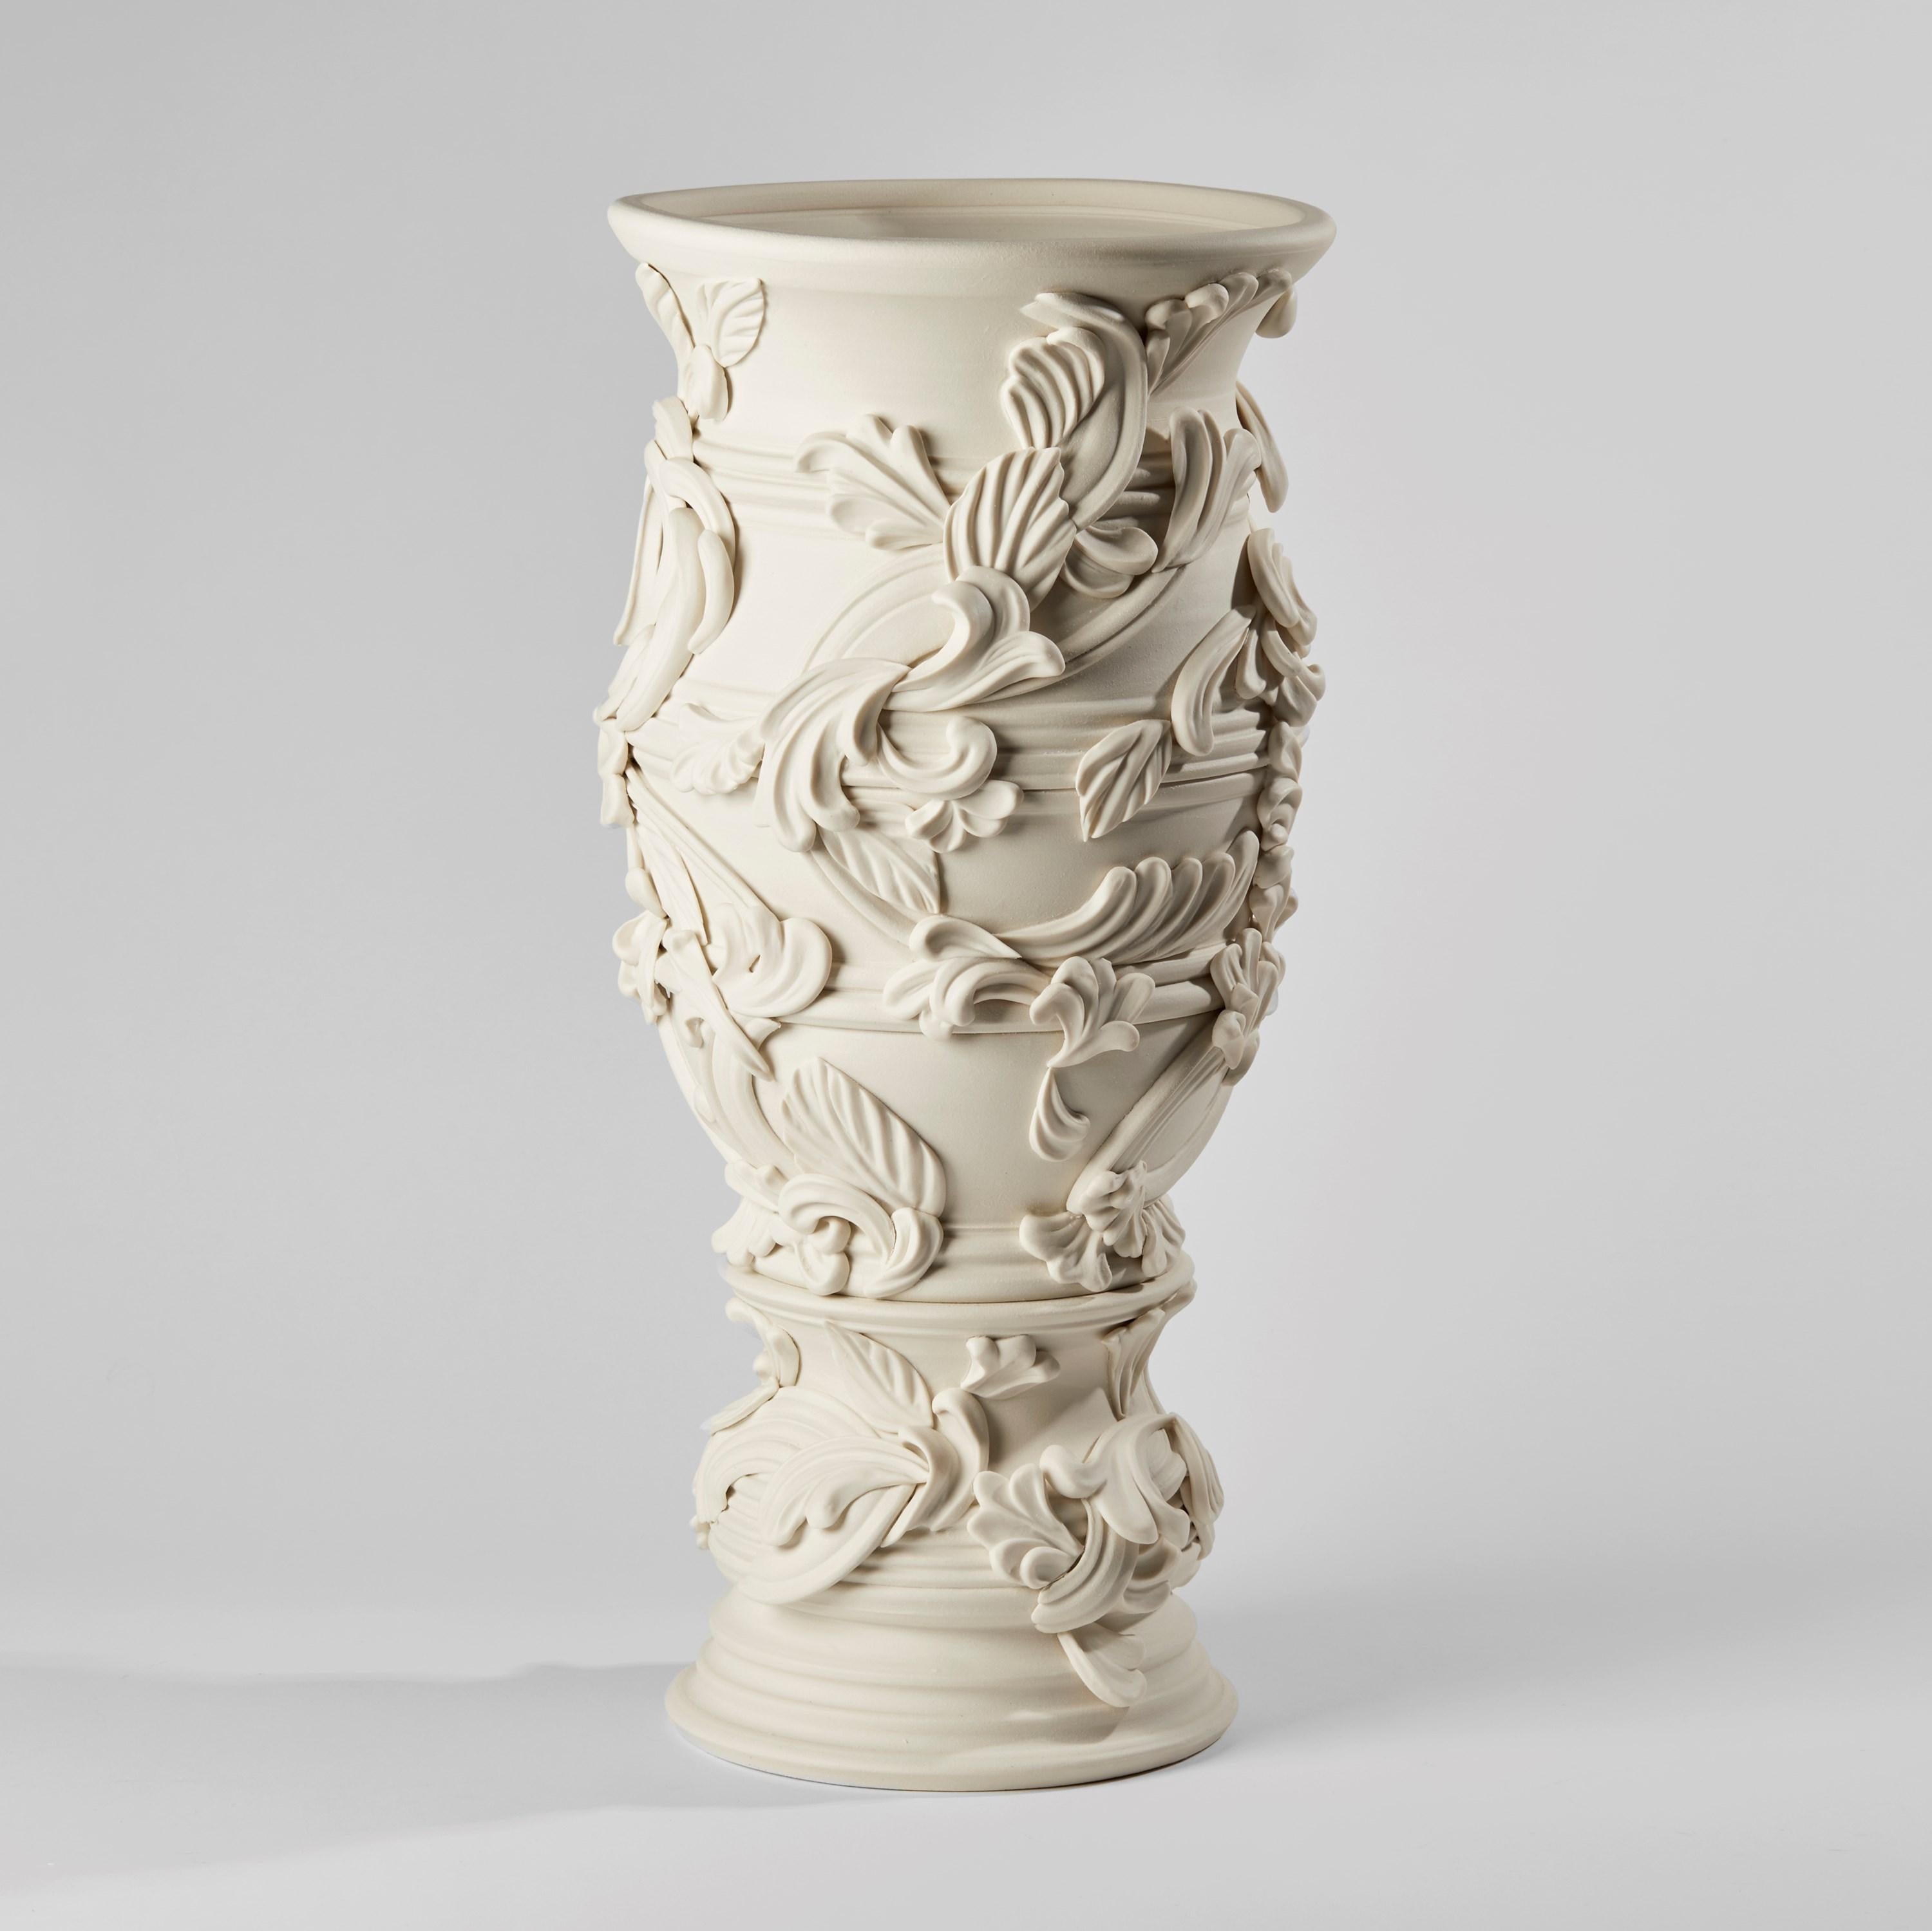 Promenade IV, a Unique Ceramic Sculptural Tall Vase in Porcelain by Jo Taylor In New Condition For Sale In London, GB